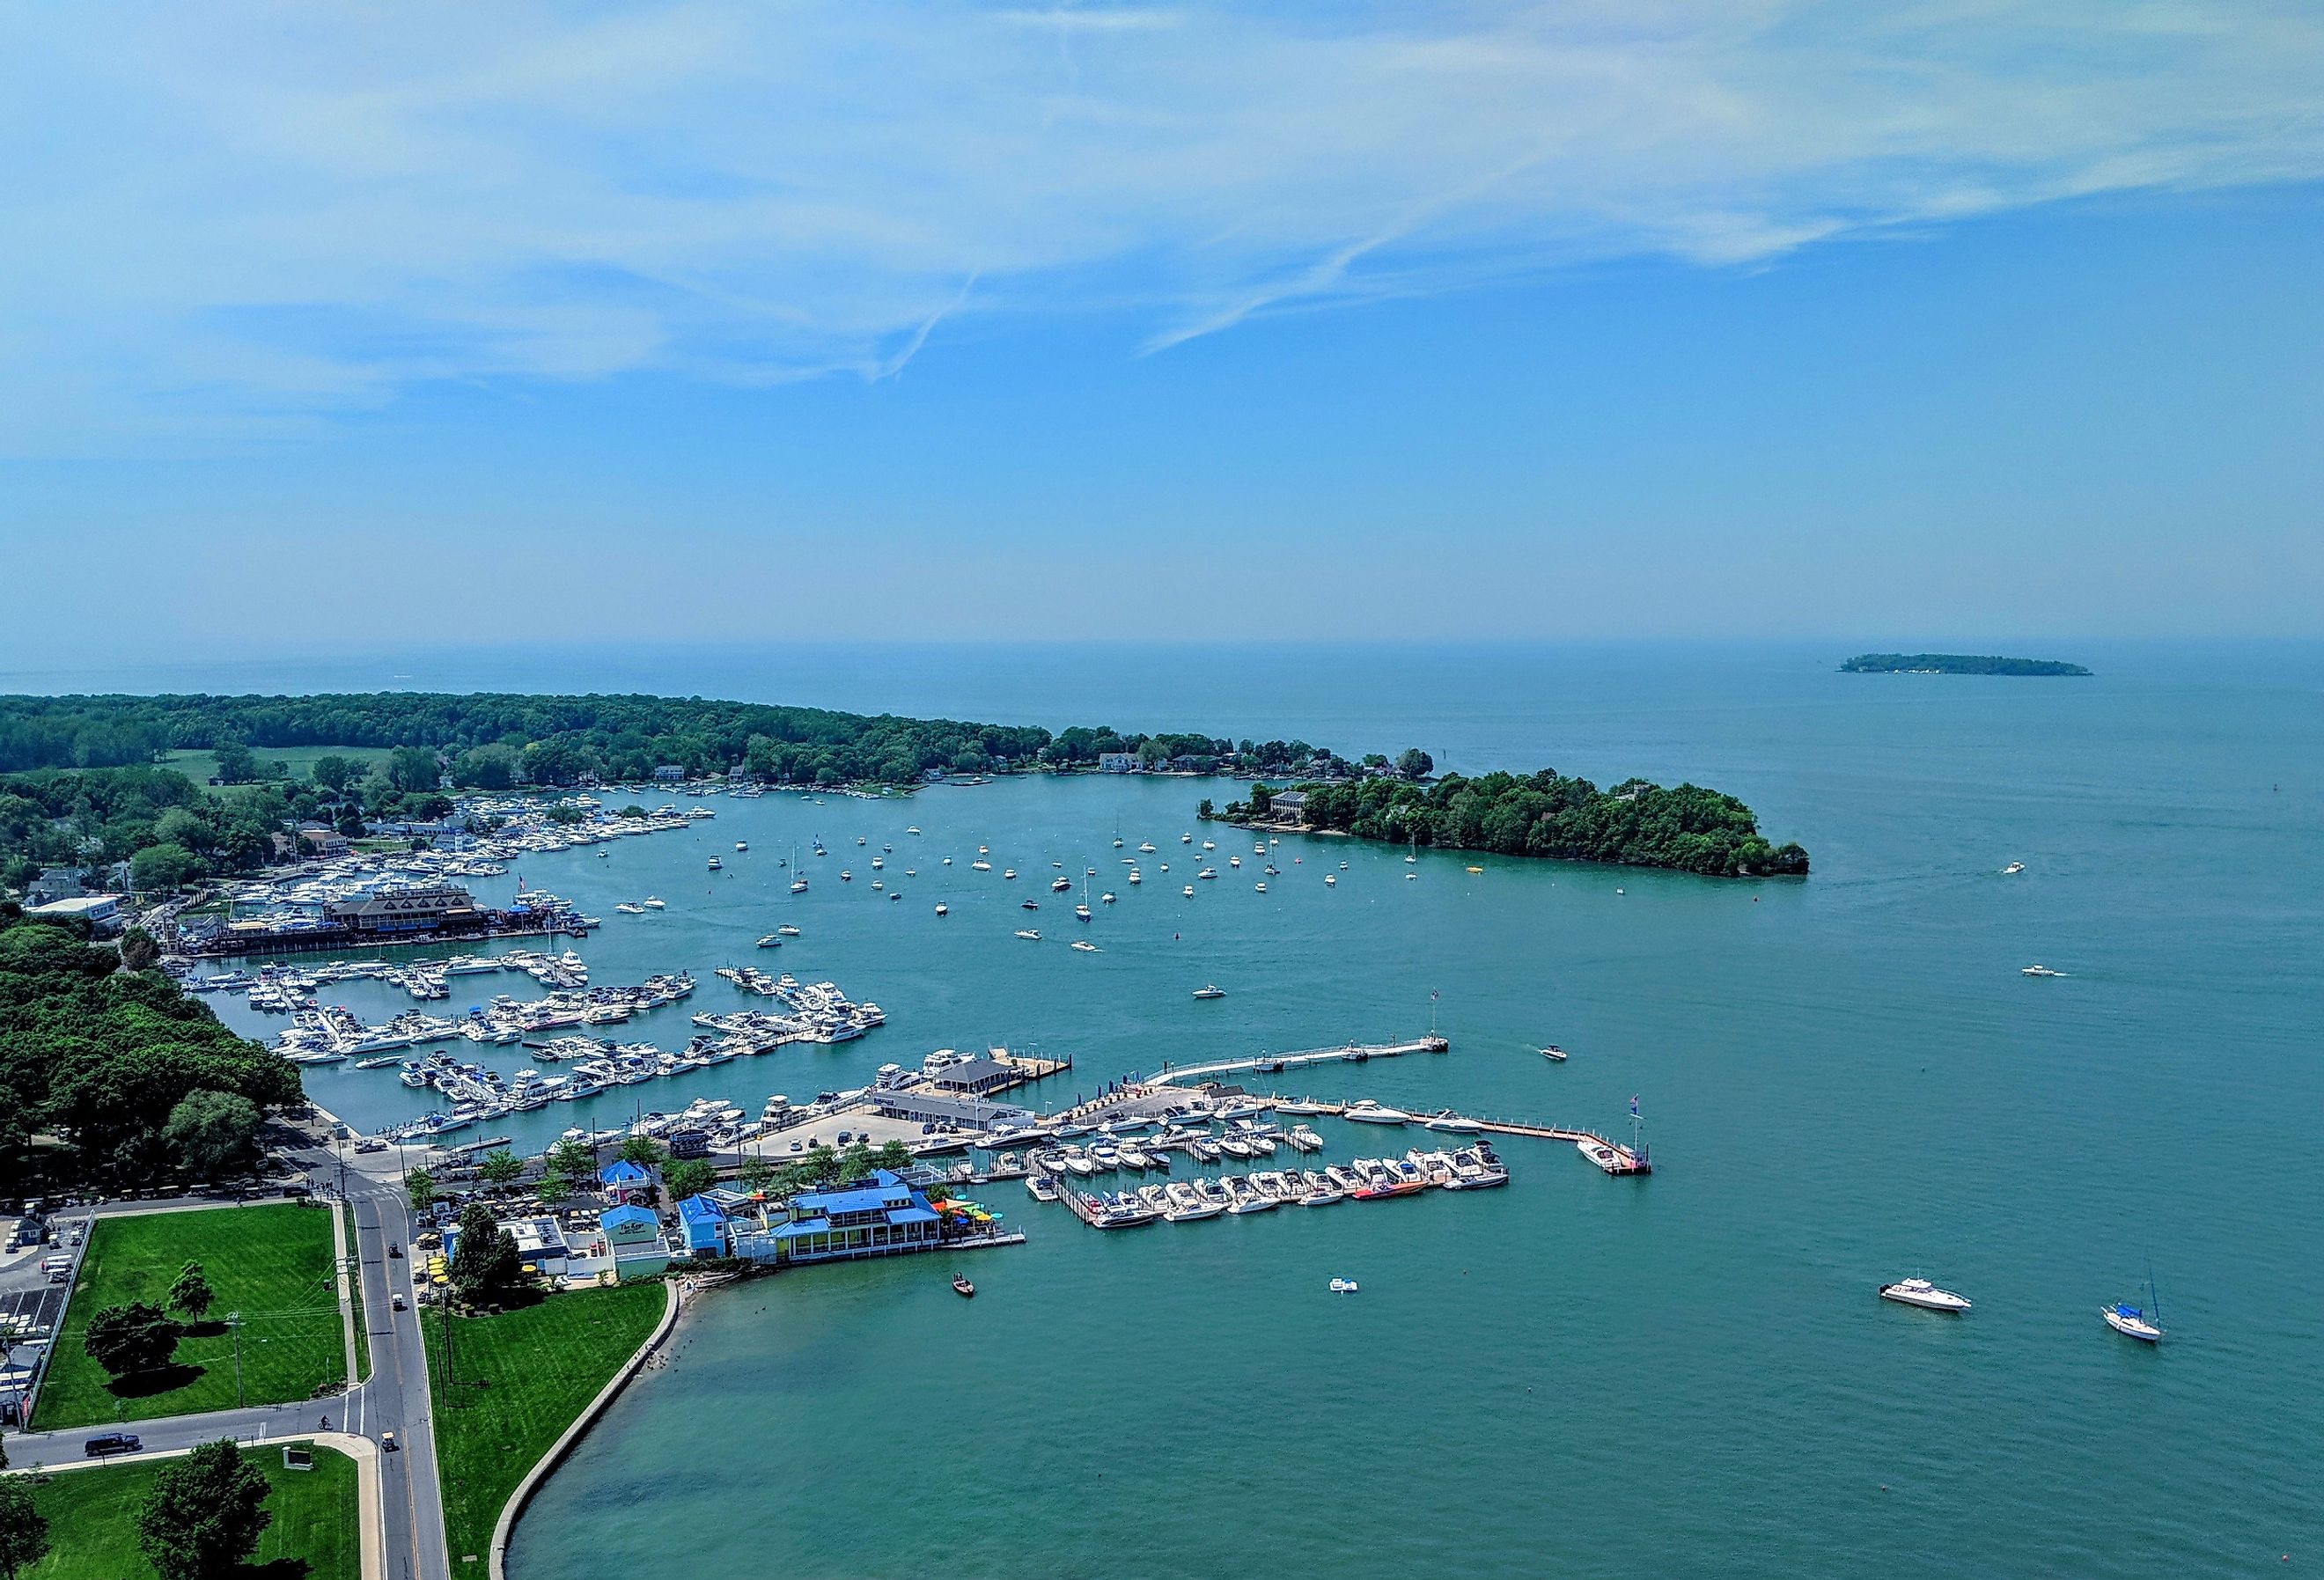 Aerial view of South Bass Island, including the harbor and town from Perry's Victory and International Peace Memorial, Put-in-bay, Ohio. Image credit LukeandKarla.Travel via Shutterstock